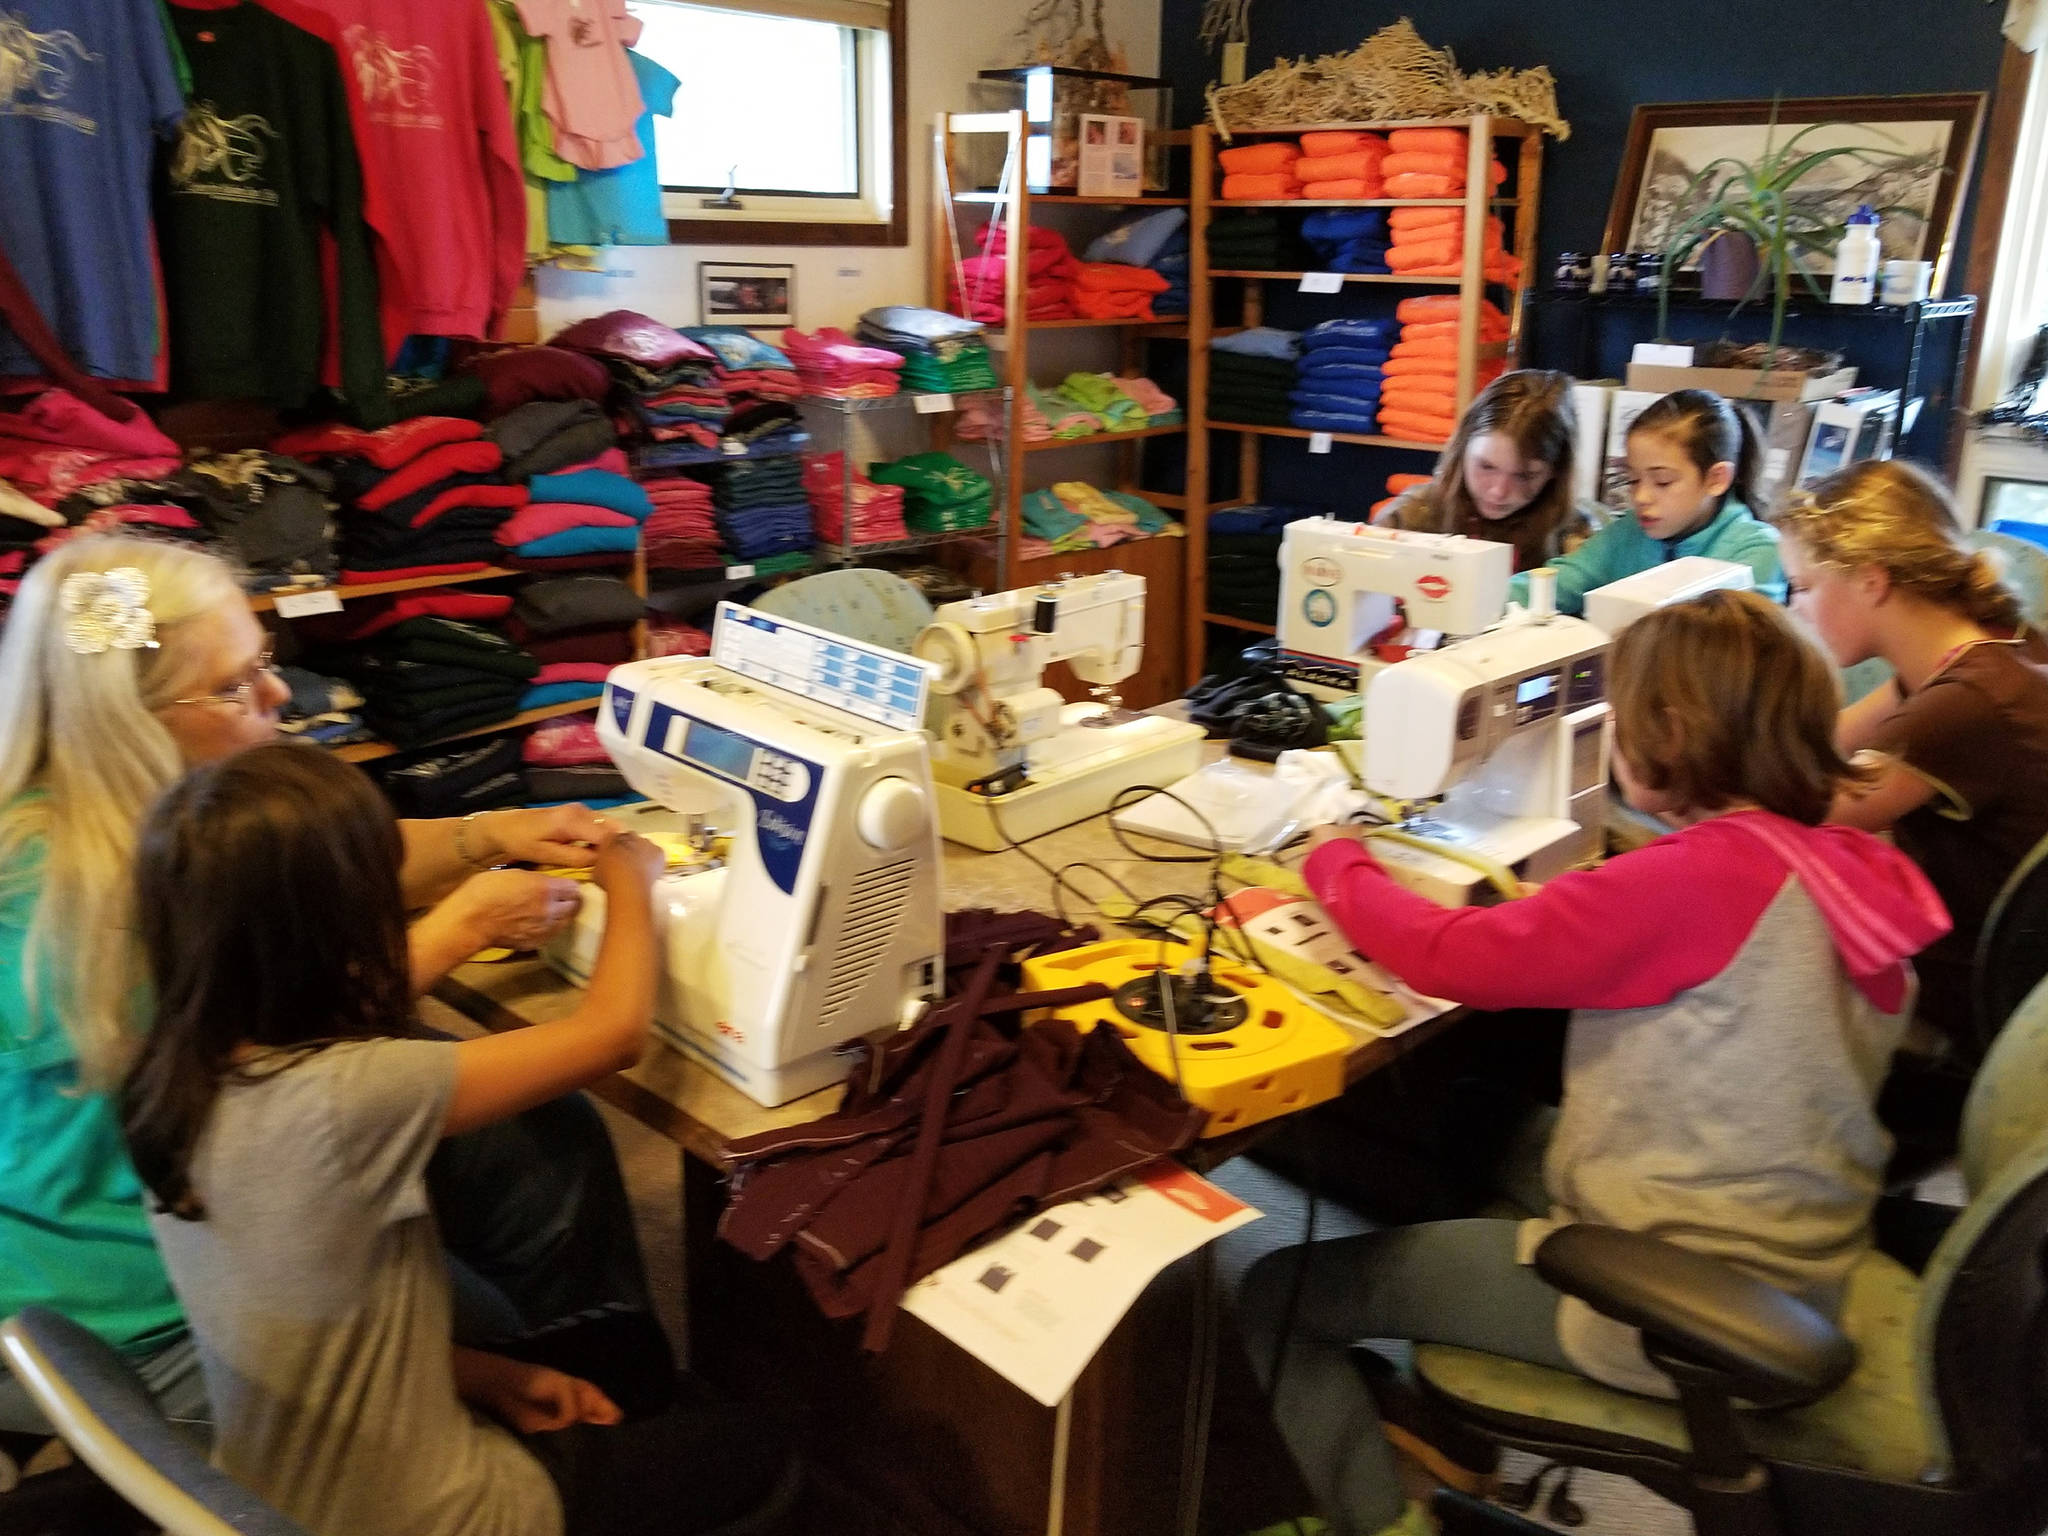 Students from the community help make boomerang bags at the Center for Alaskan Coastal Studies in Homer, Alaska, in October 2017. The center is spearheading an effort to localize the bags, which are the product of an international organization that encourages communities to make the bags as a replacement for plastic ones. (Photo courtesy Beth Trowbridge)